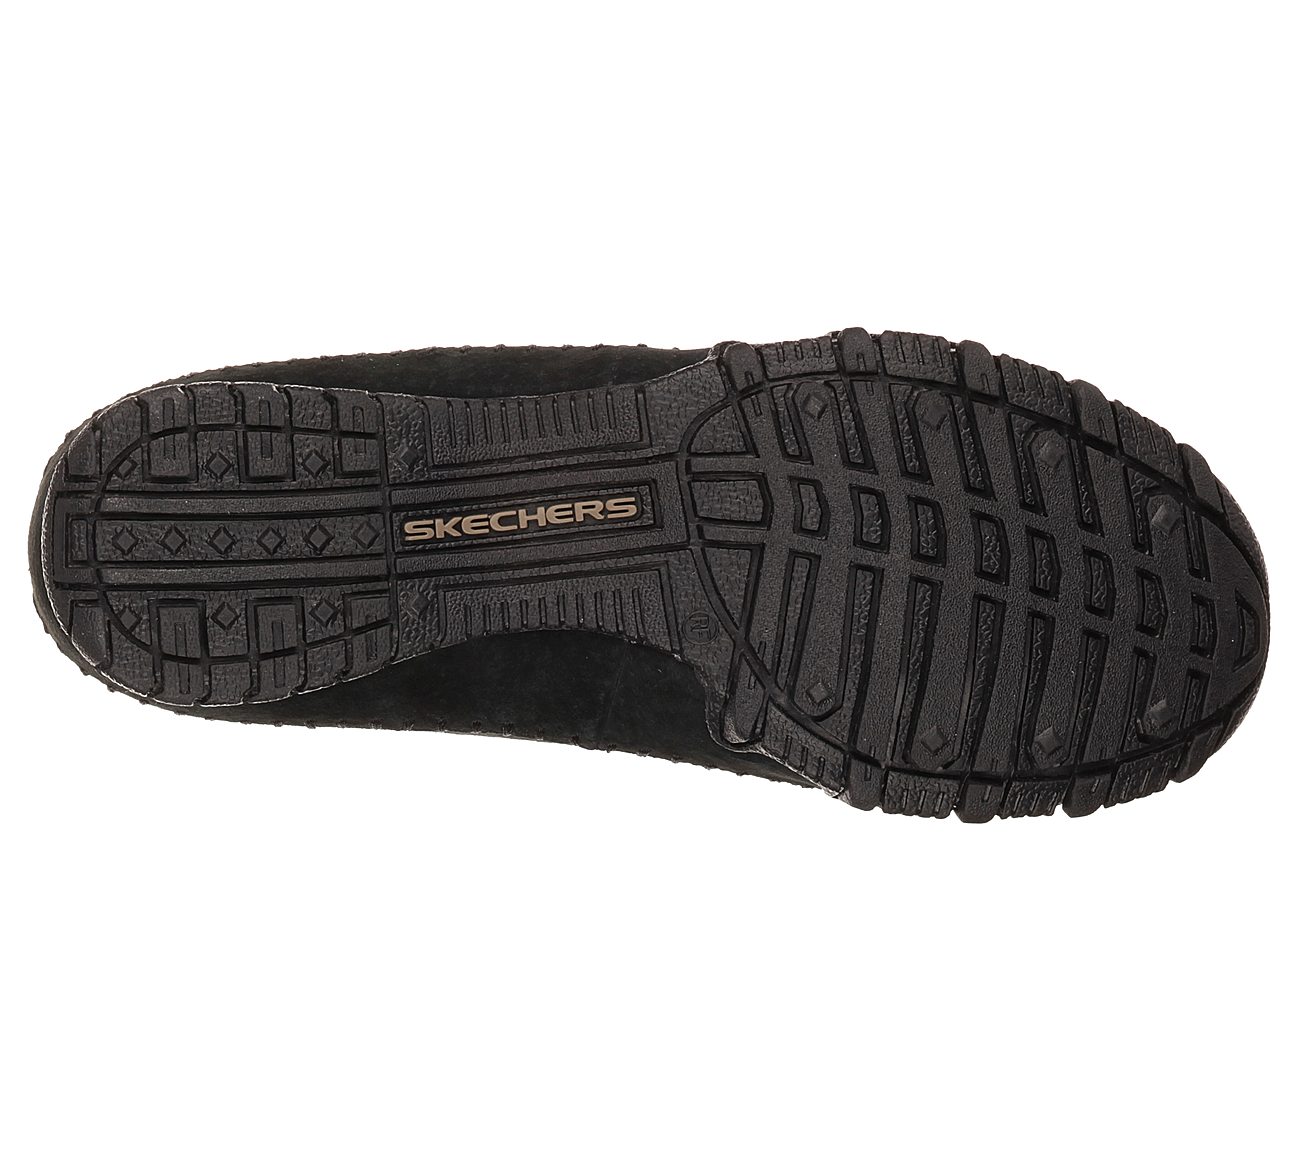 Buy SKECHERS Relaxed Fit: Bikers - Totem Pole Modern Comfort Shoes